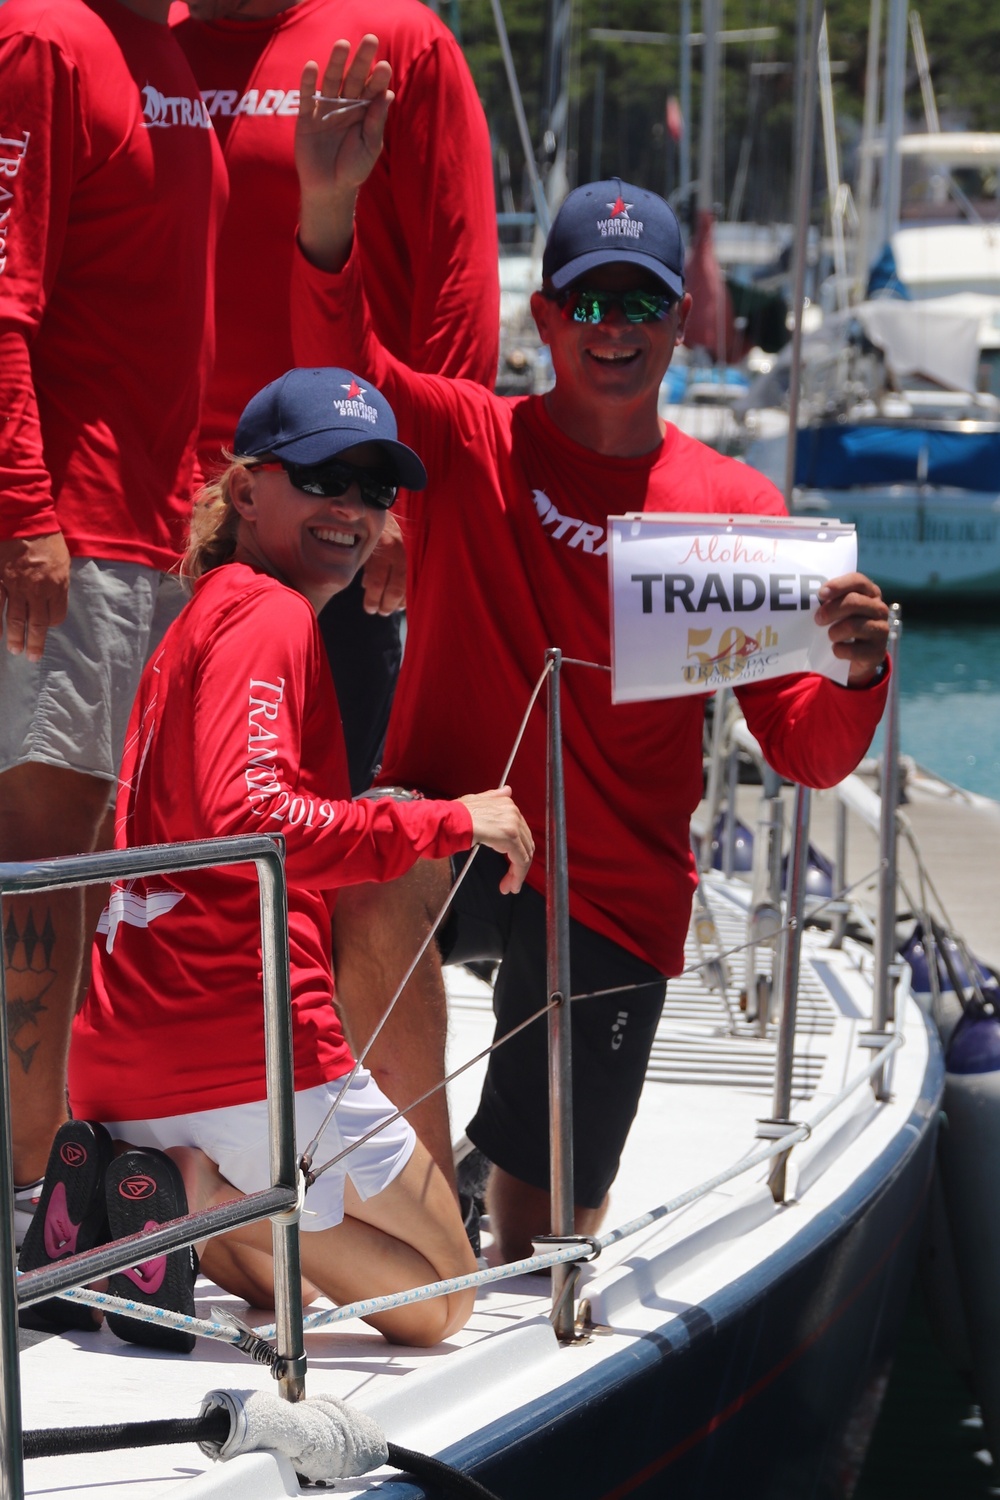 DVIDS Images Military Crew Completes Transpacific Yacht Race [Image